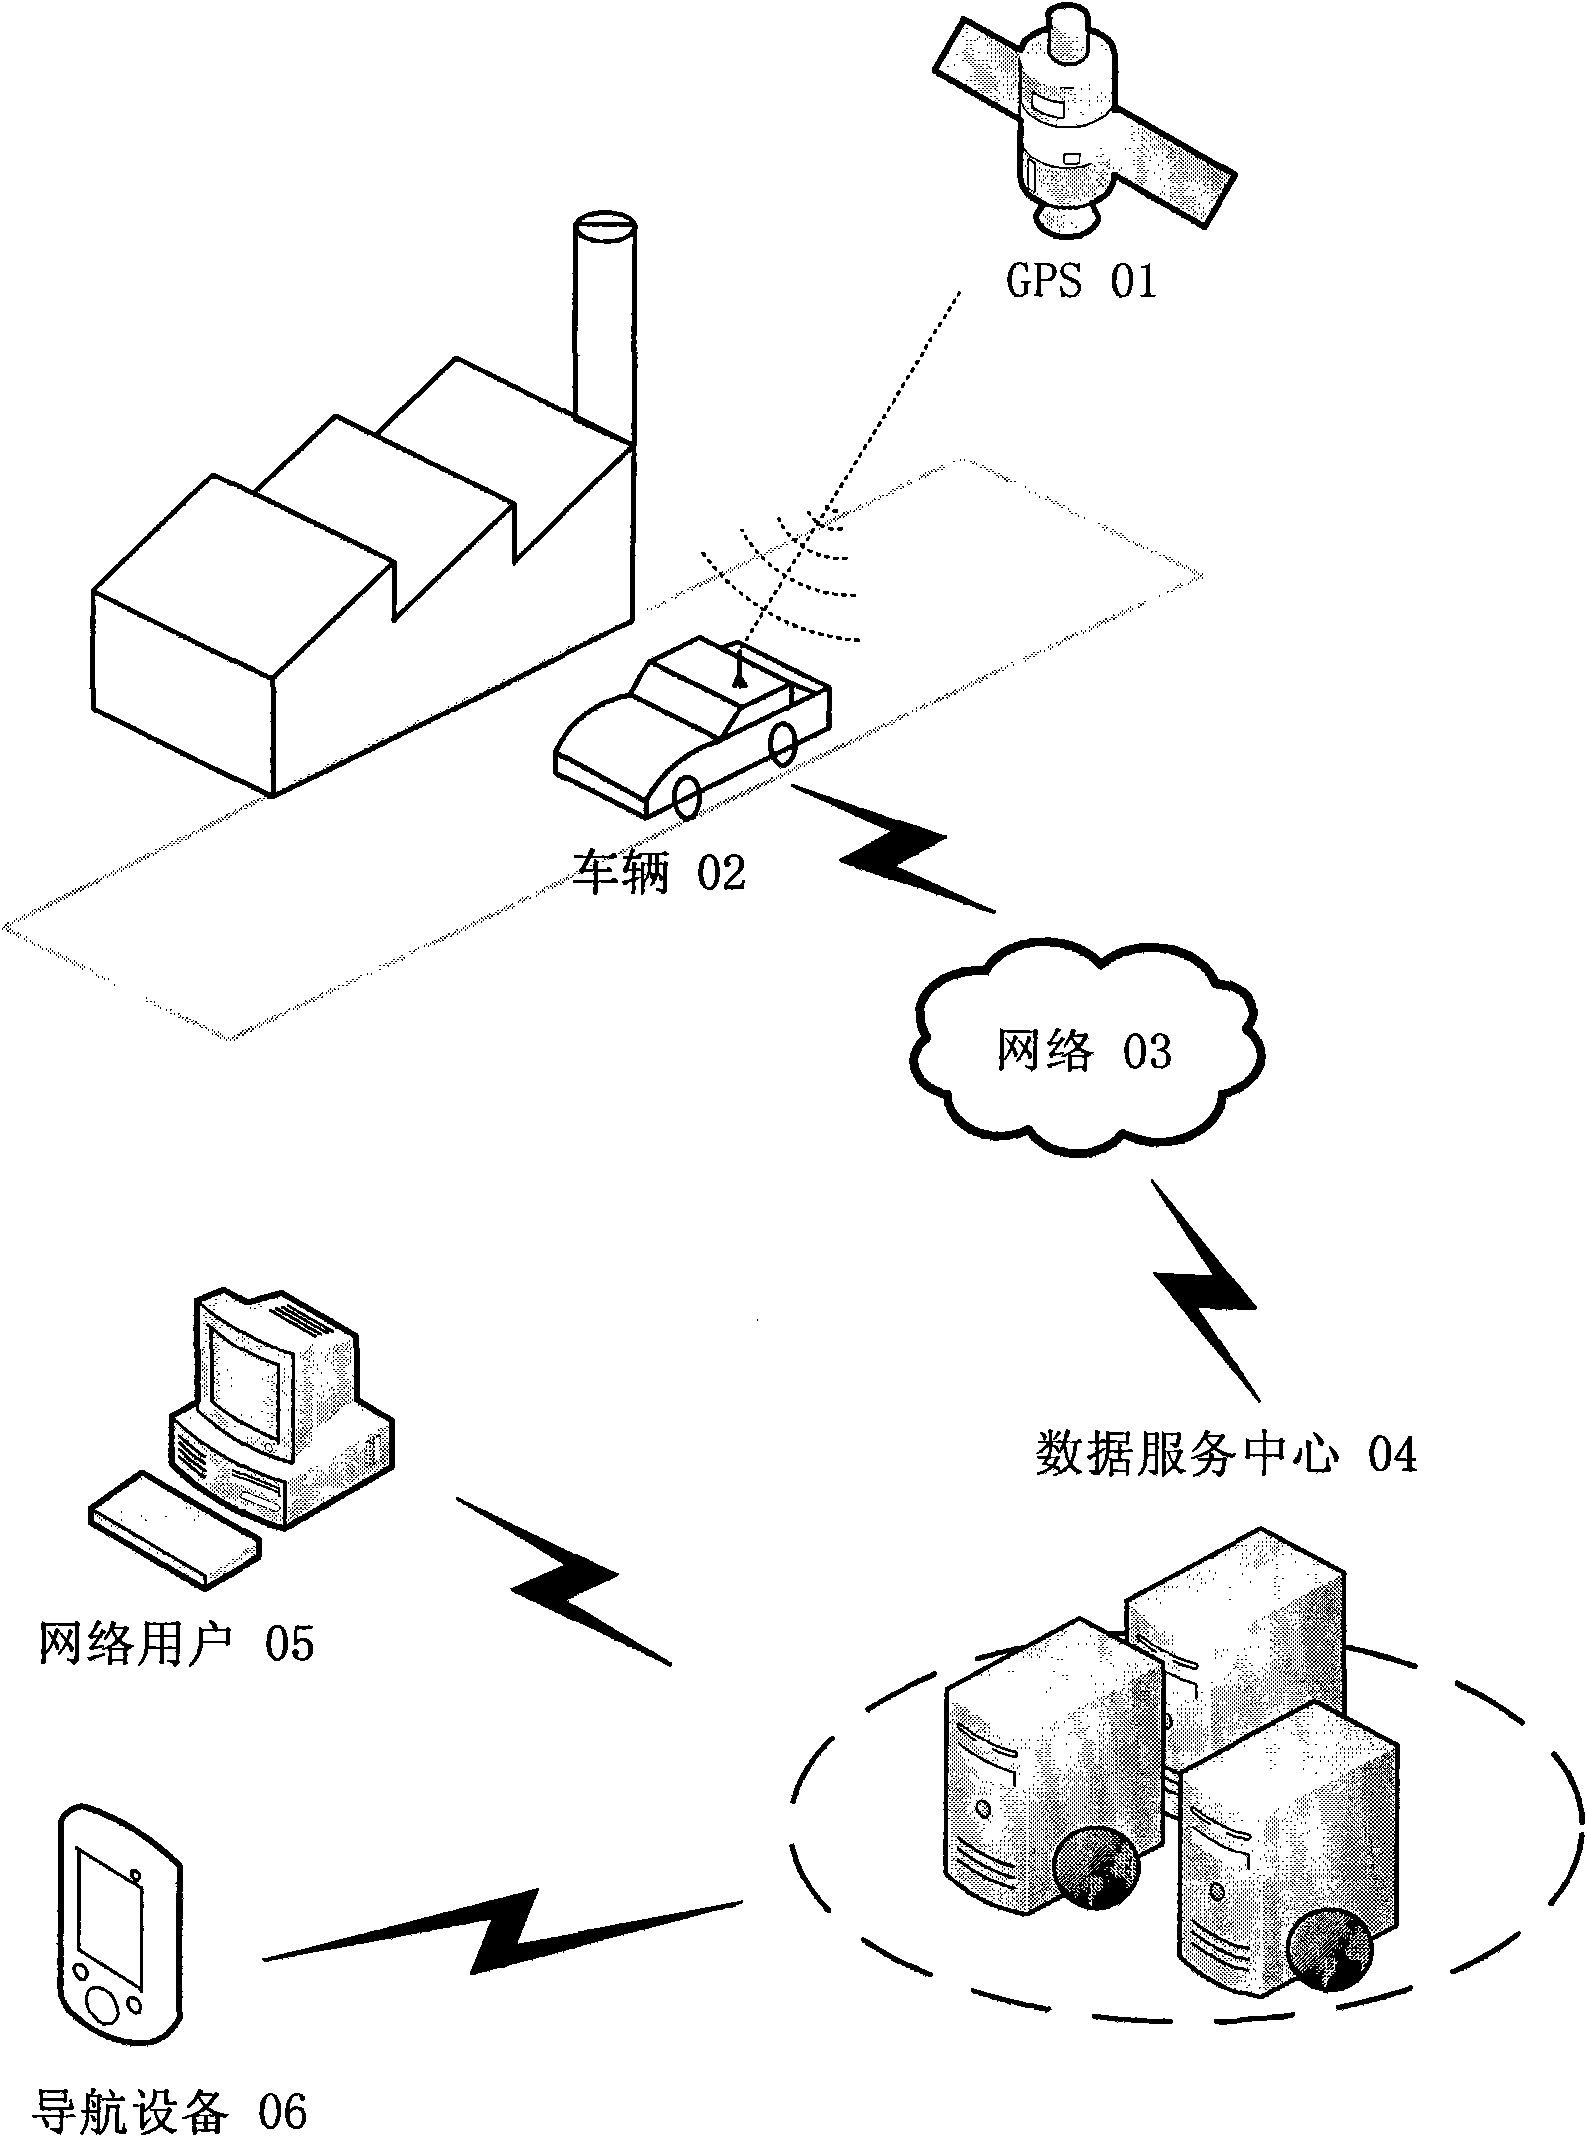 Method for collecting road scenes